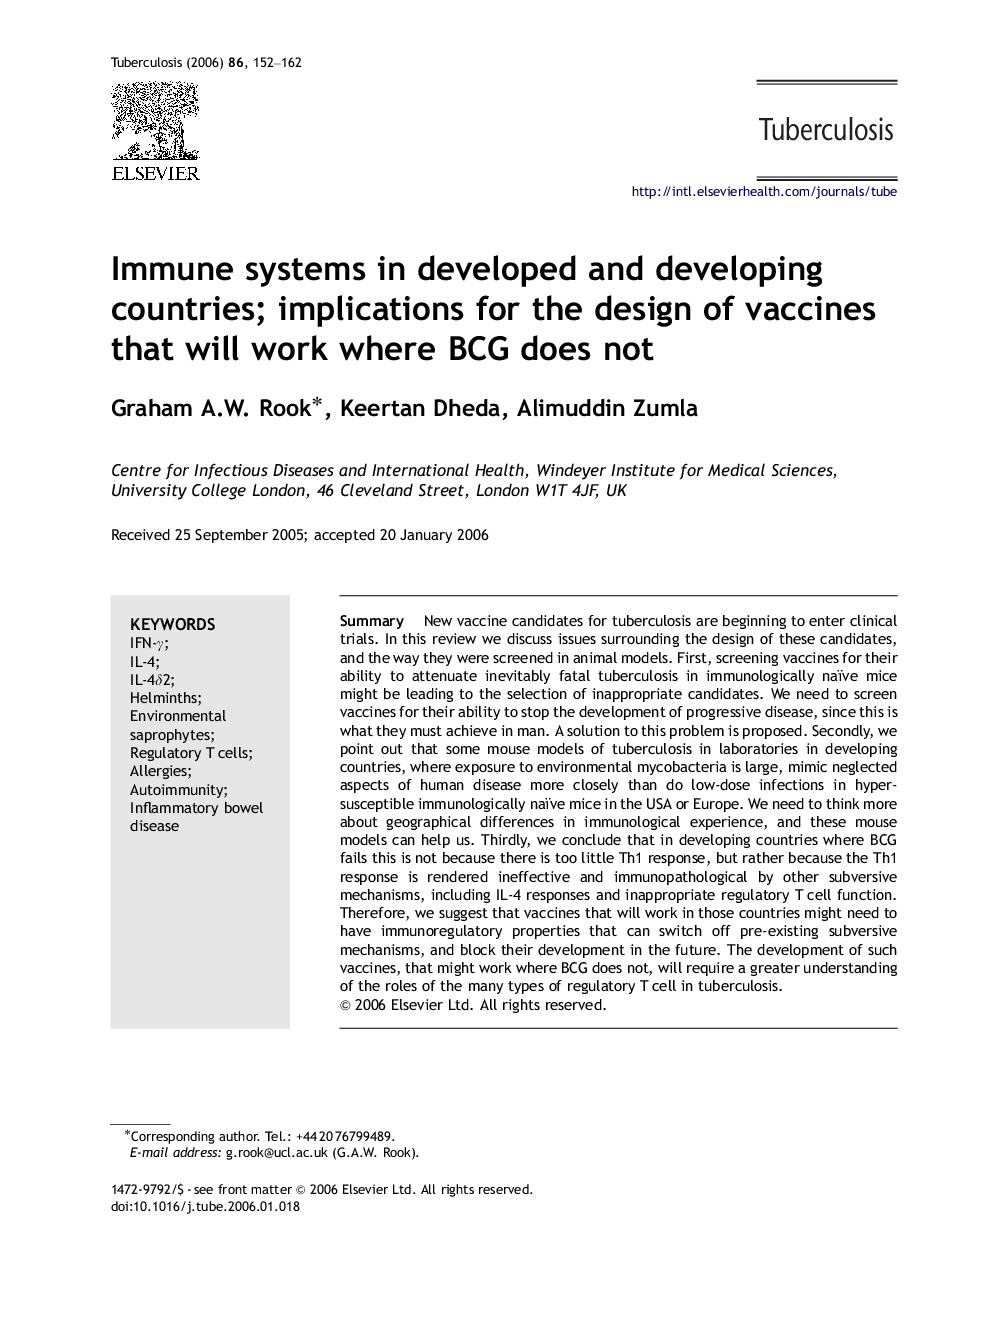 Immune systems in developed and developing countries; implications for the design of vaccines that will work where BCG does not